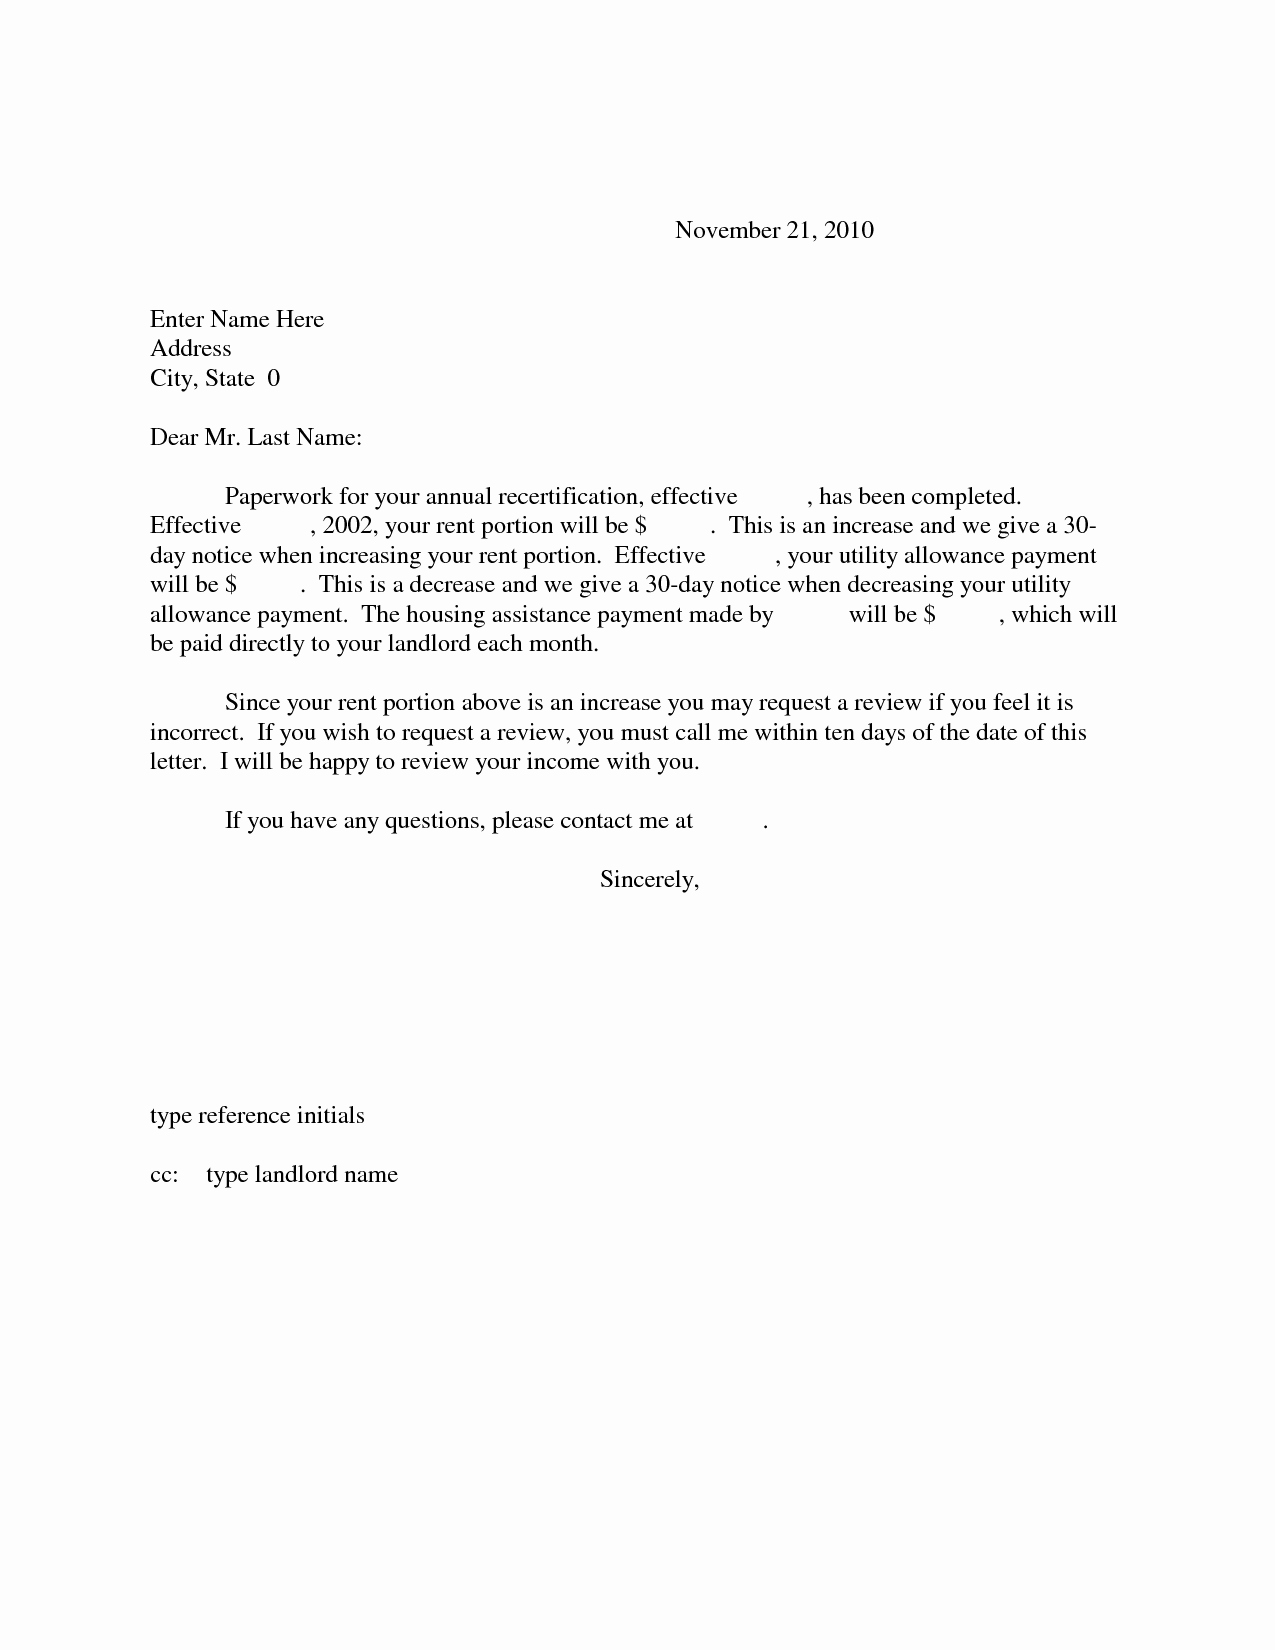 Rent Increase Letter Template Unique Best S Of Rent Increase Letter to Tenant In